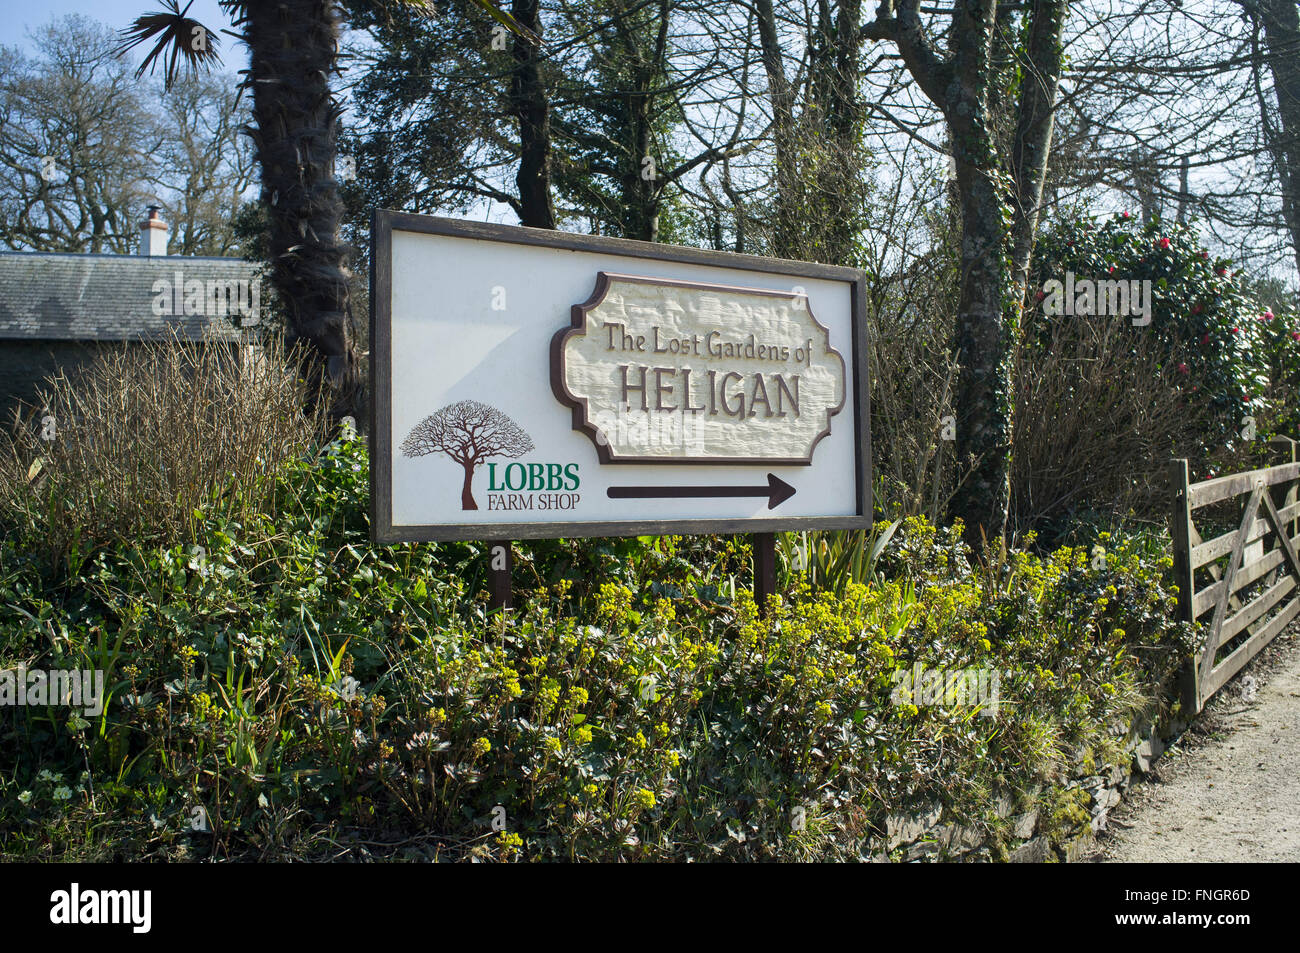 The Lost Gardens of Heligan. Stock Photo